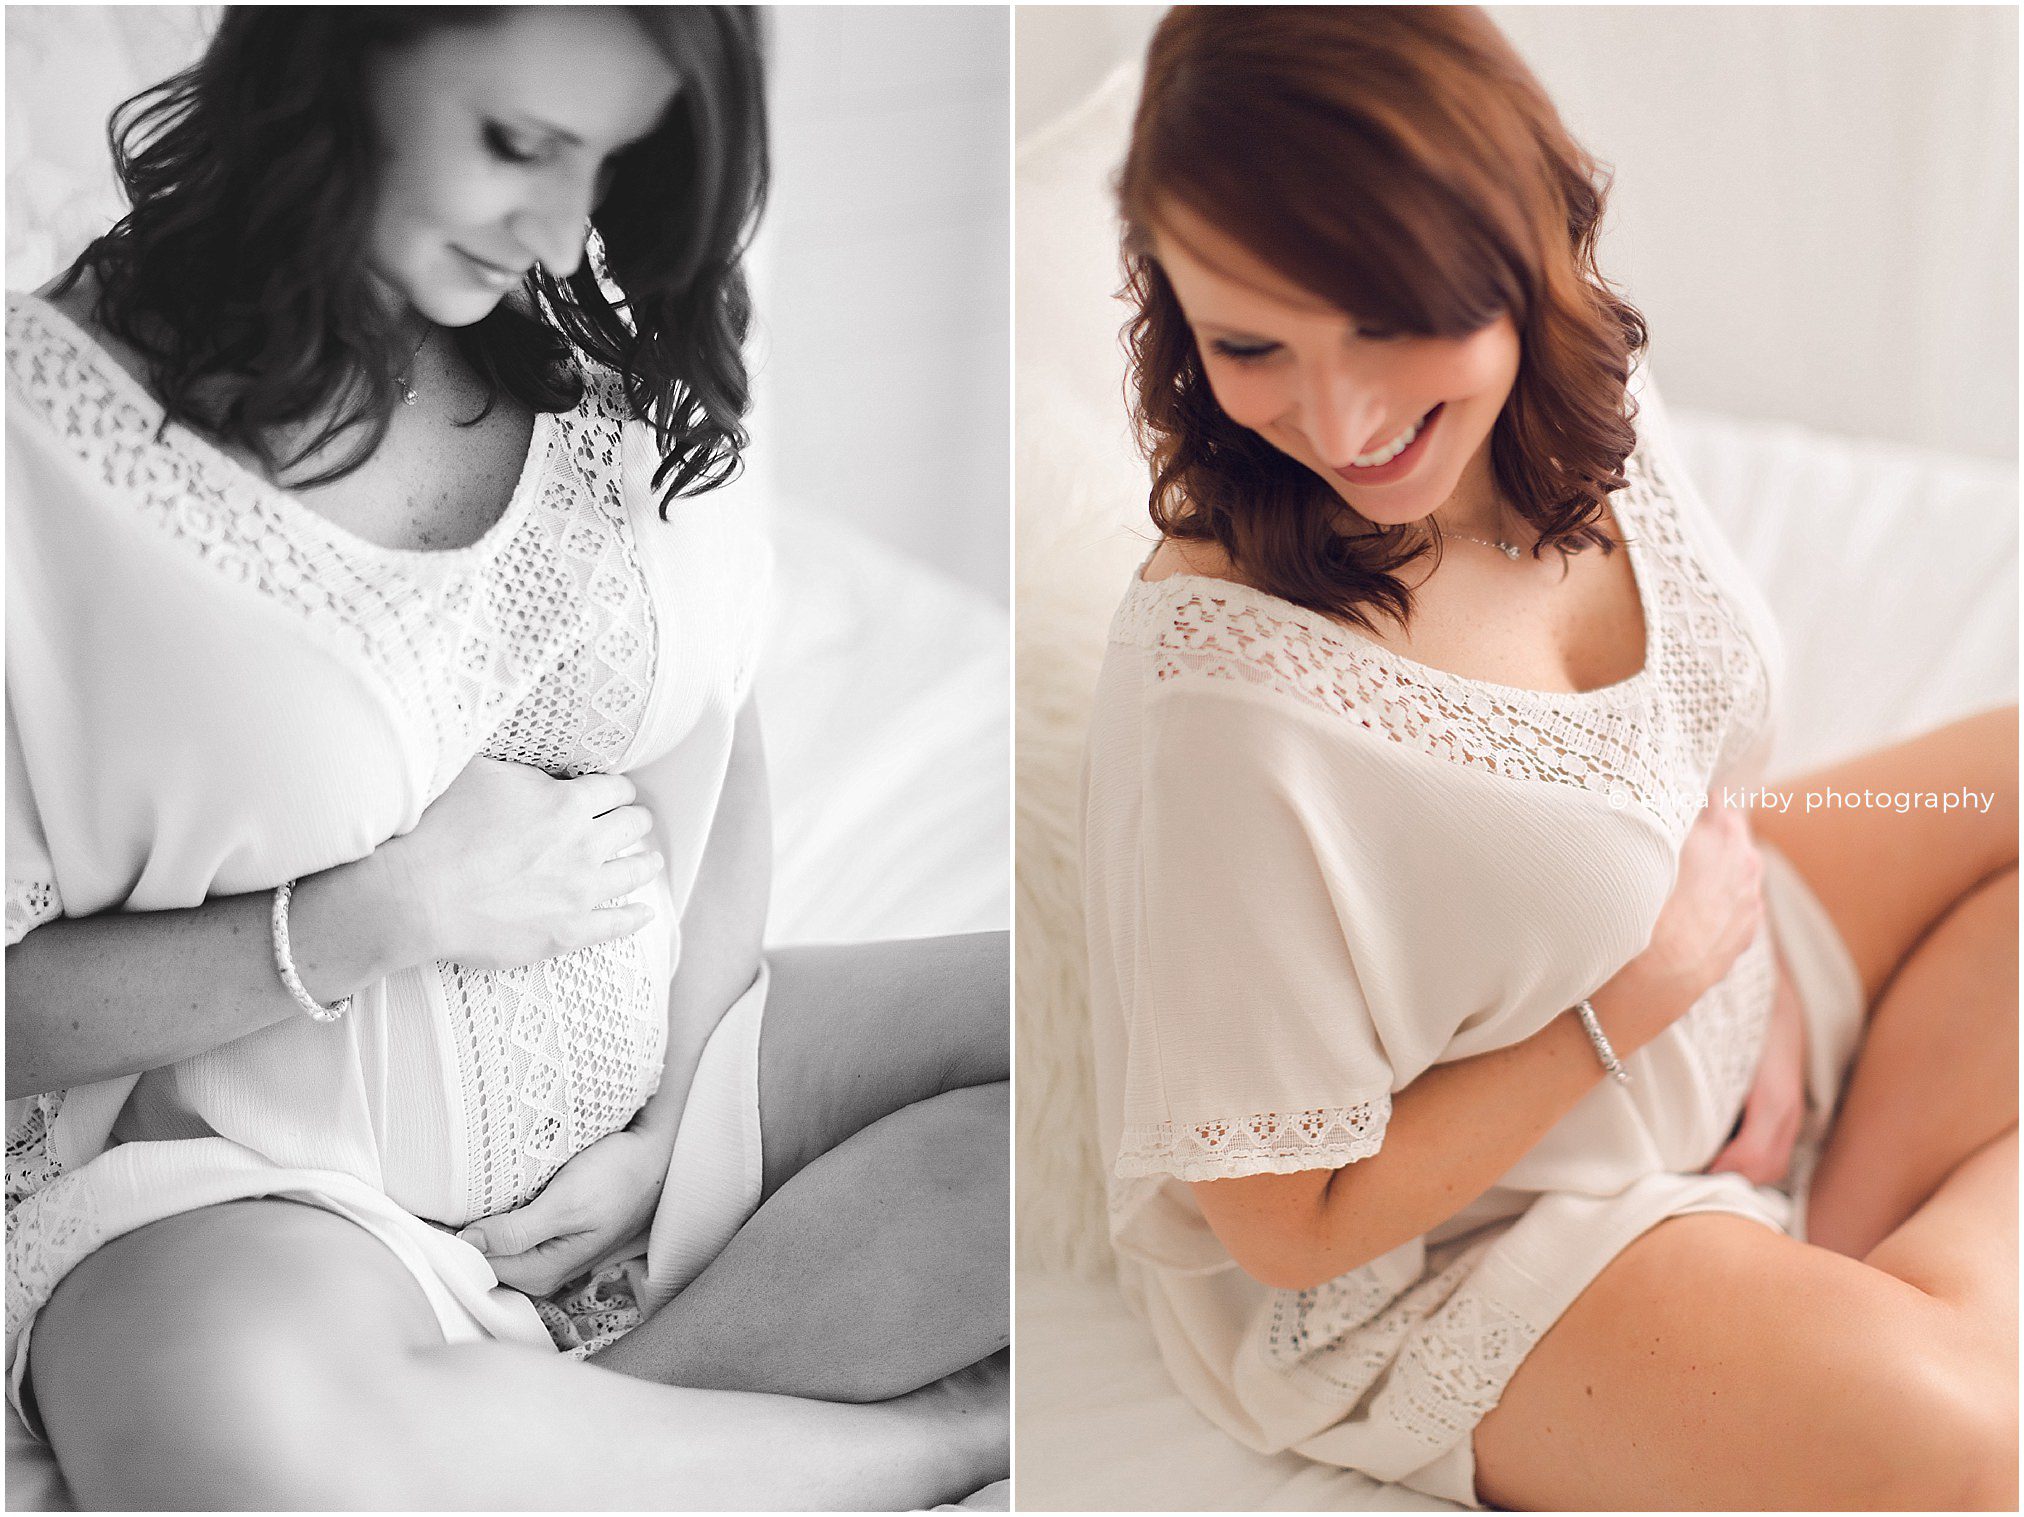  maternity photography session nwa - studio maternity session in northwest arkansas bentonville fayetteville rogers - erica kirby photography